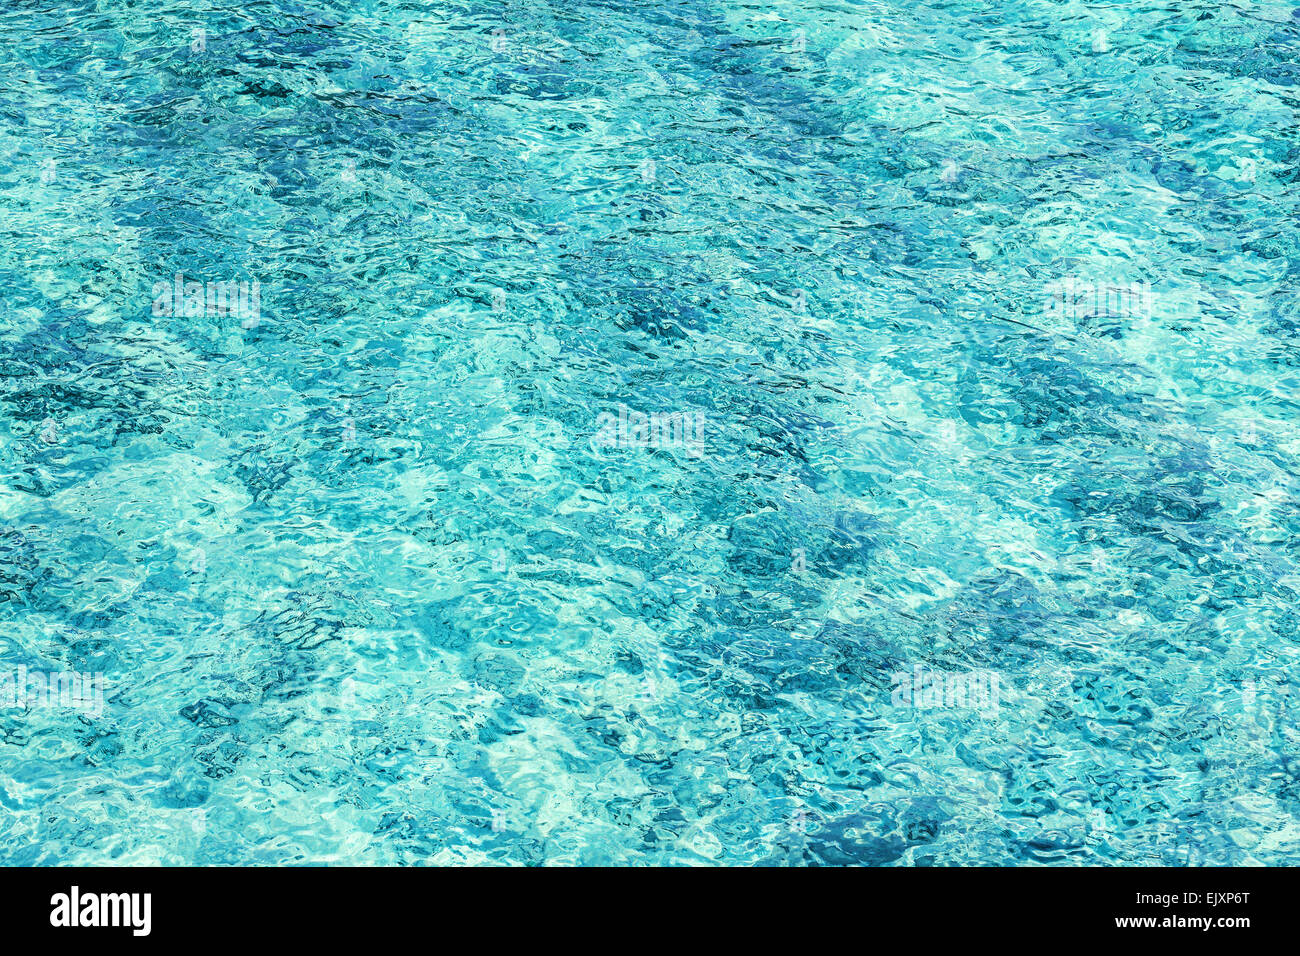 Abstract background made of crystal clear sea water. Stock Photo